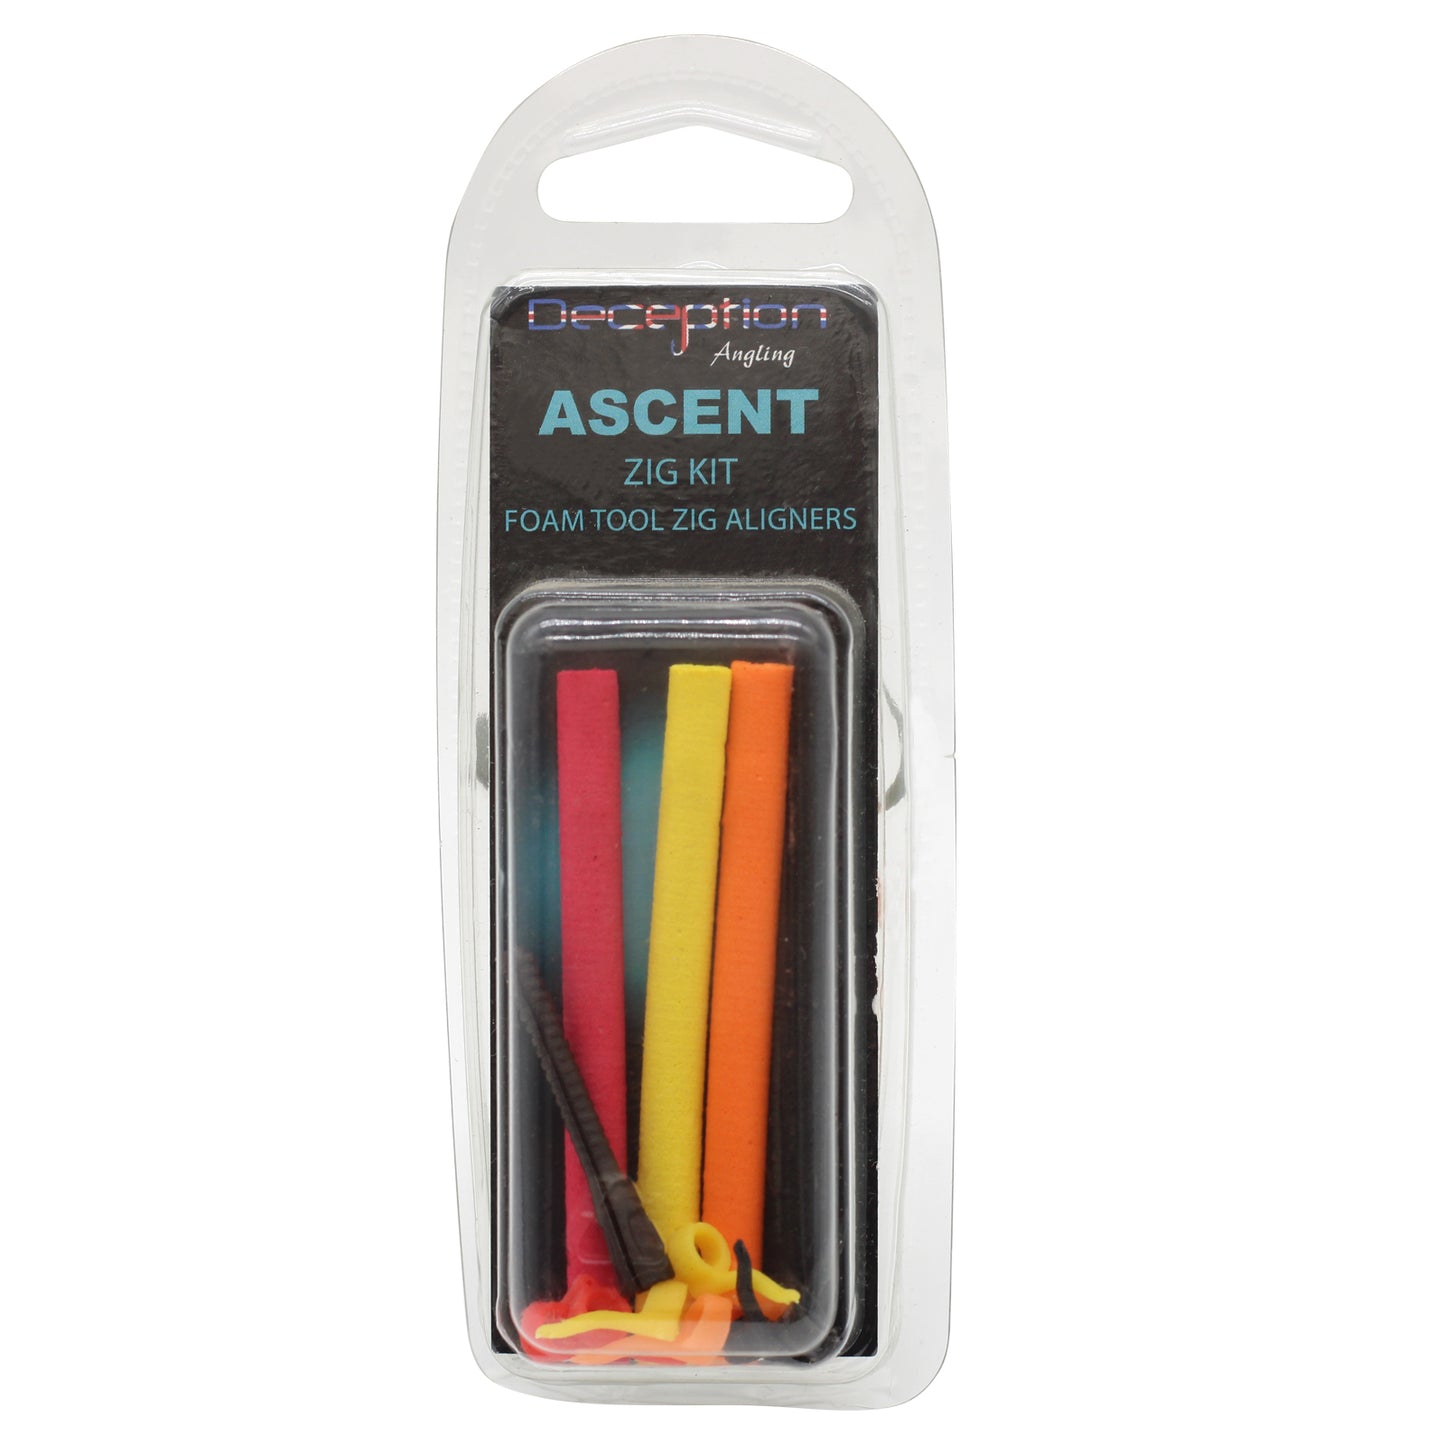 Deception Angling Ascent Zig Kit Foam Tool Zig Aligners for Fishing